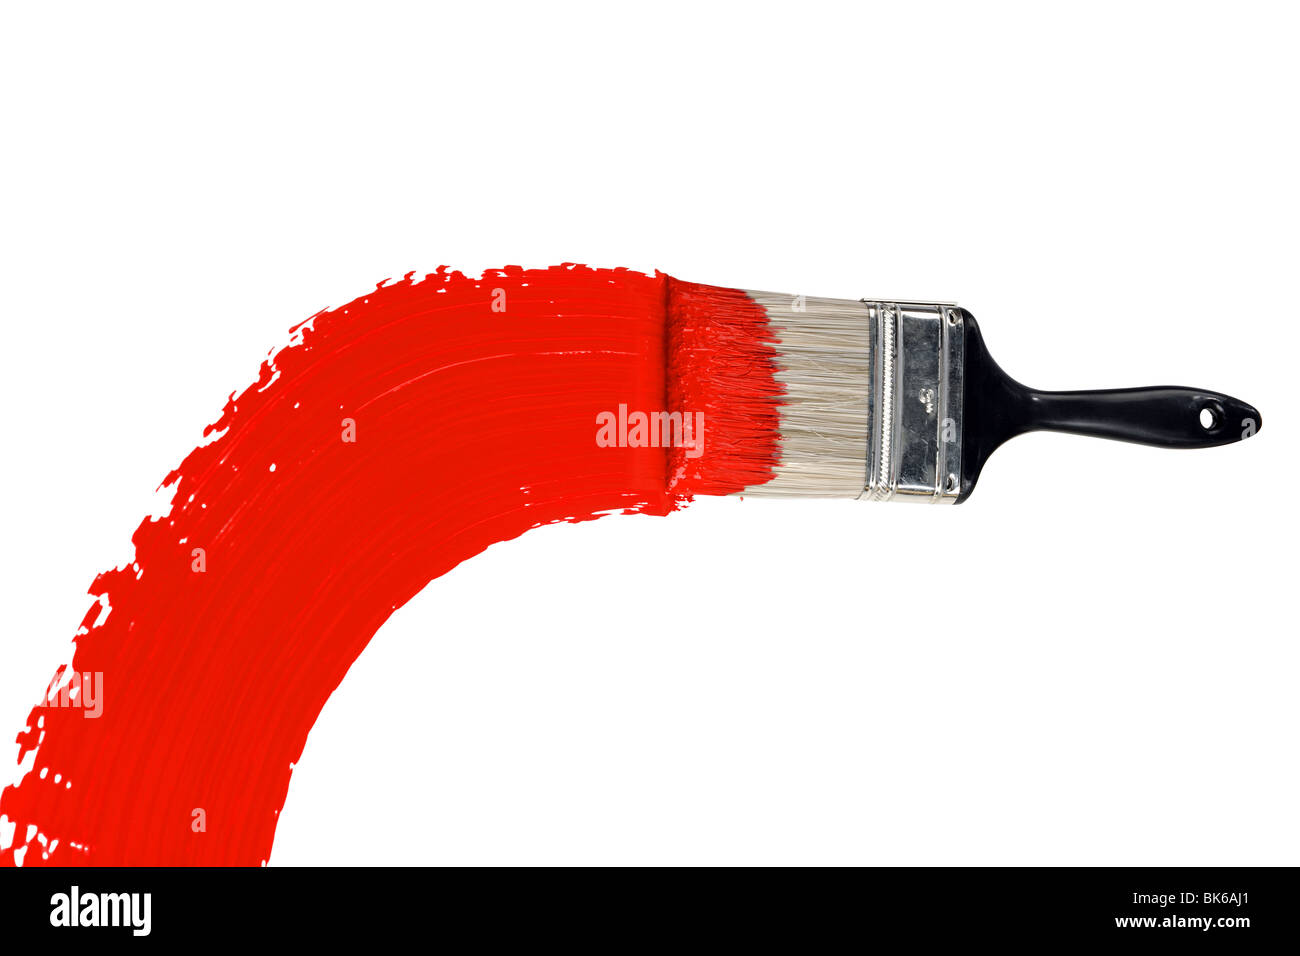 Brush with red paint isolated over white background Stock Photo